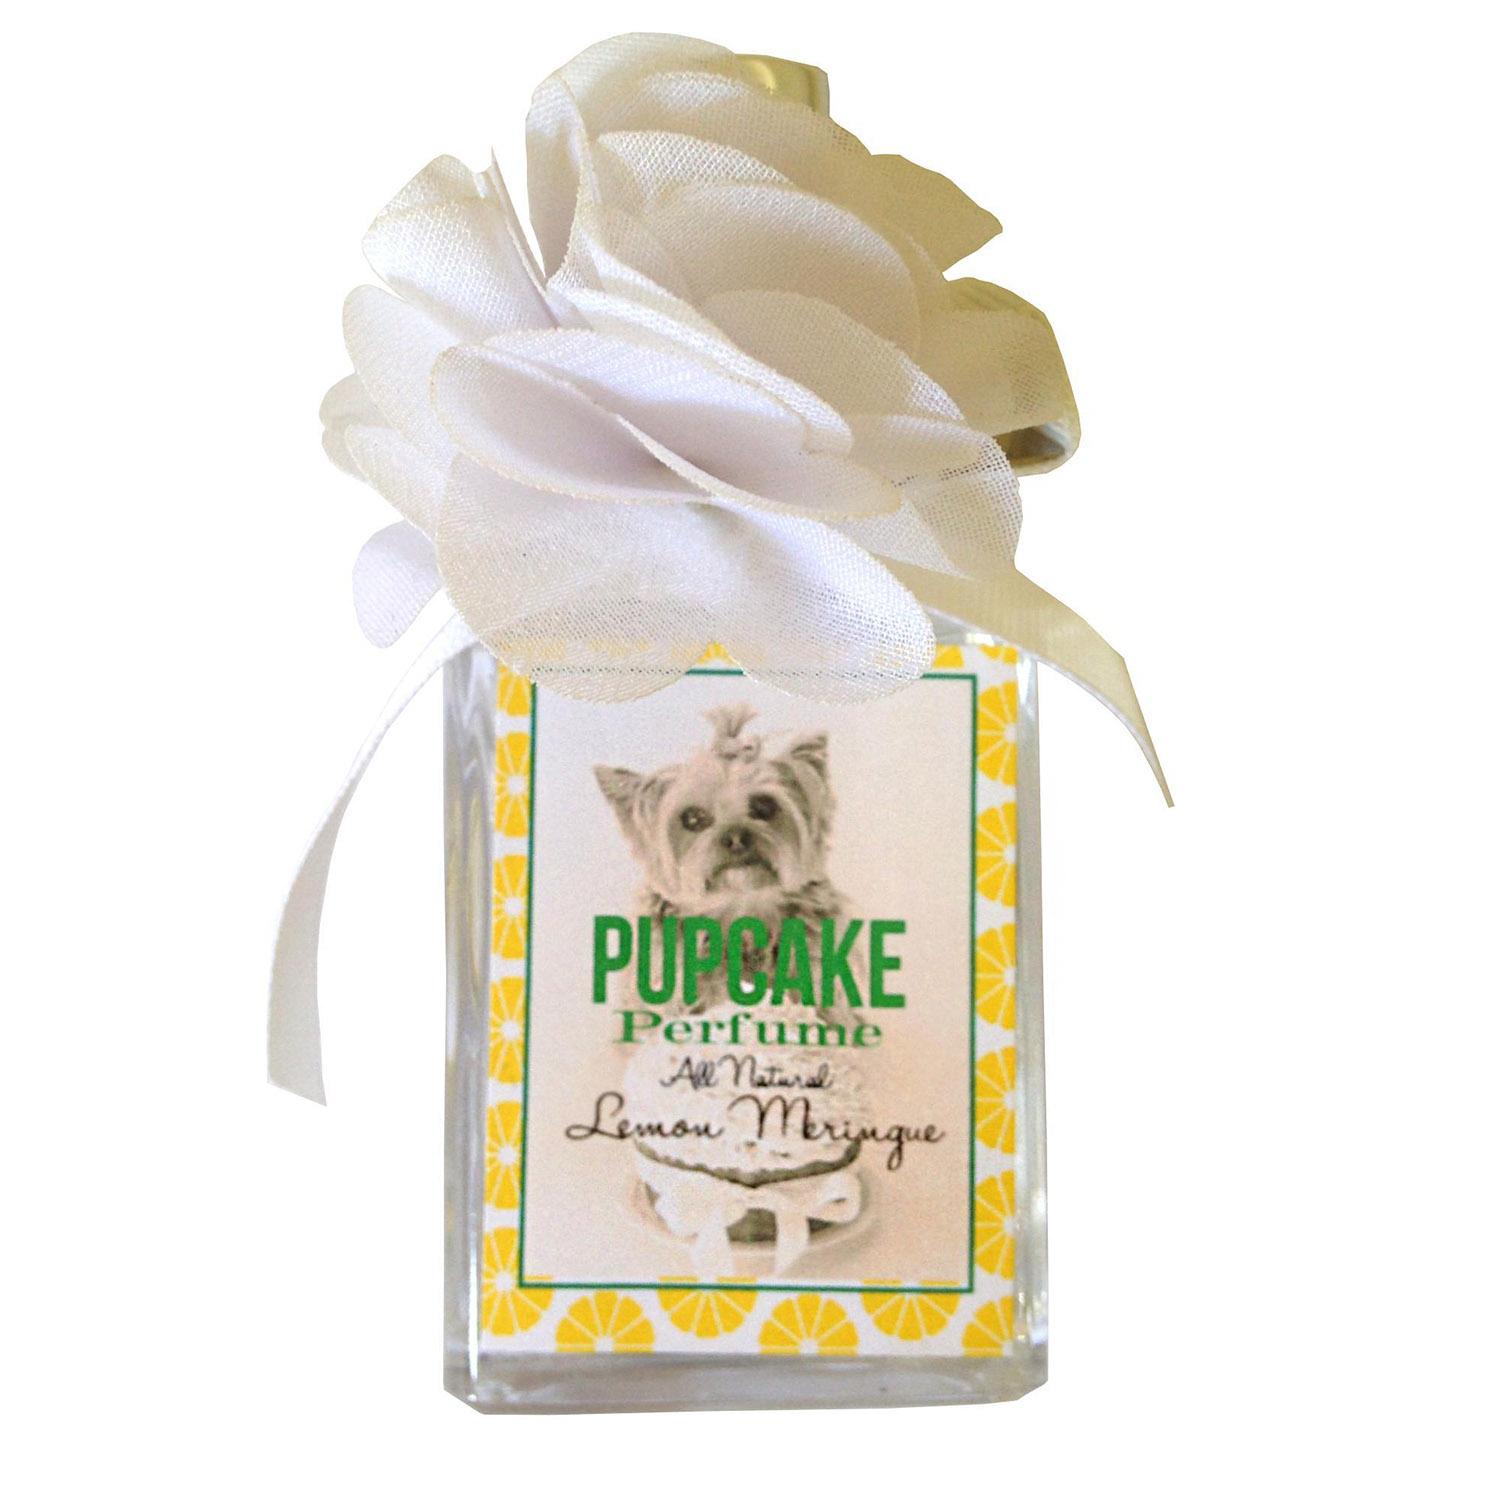 The Dog Squad Pupcake Perfume for Dogs - All Natural Lemon Meringue